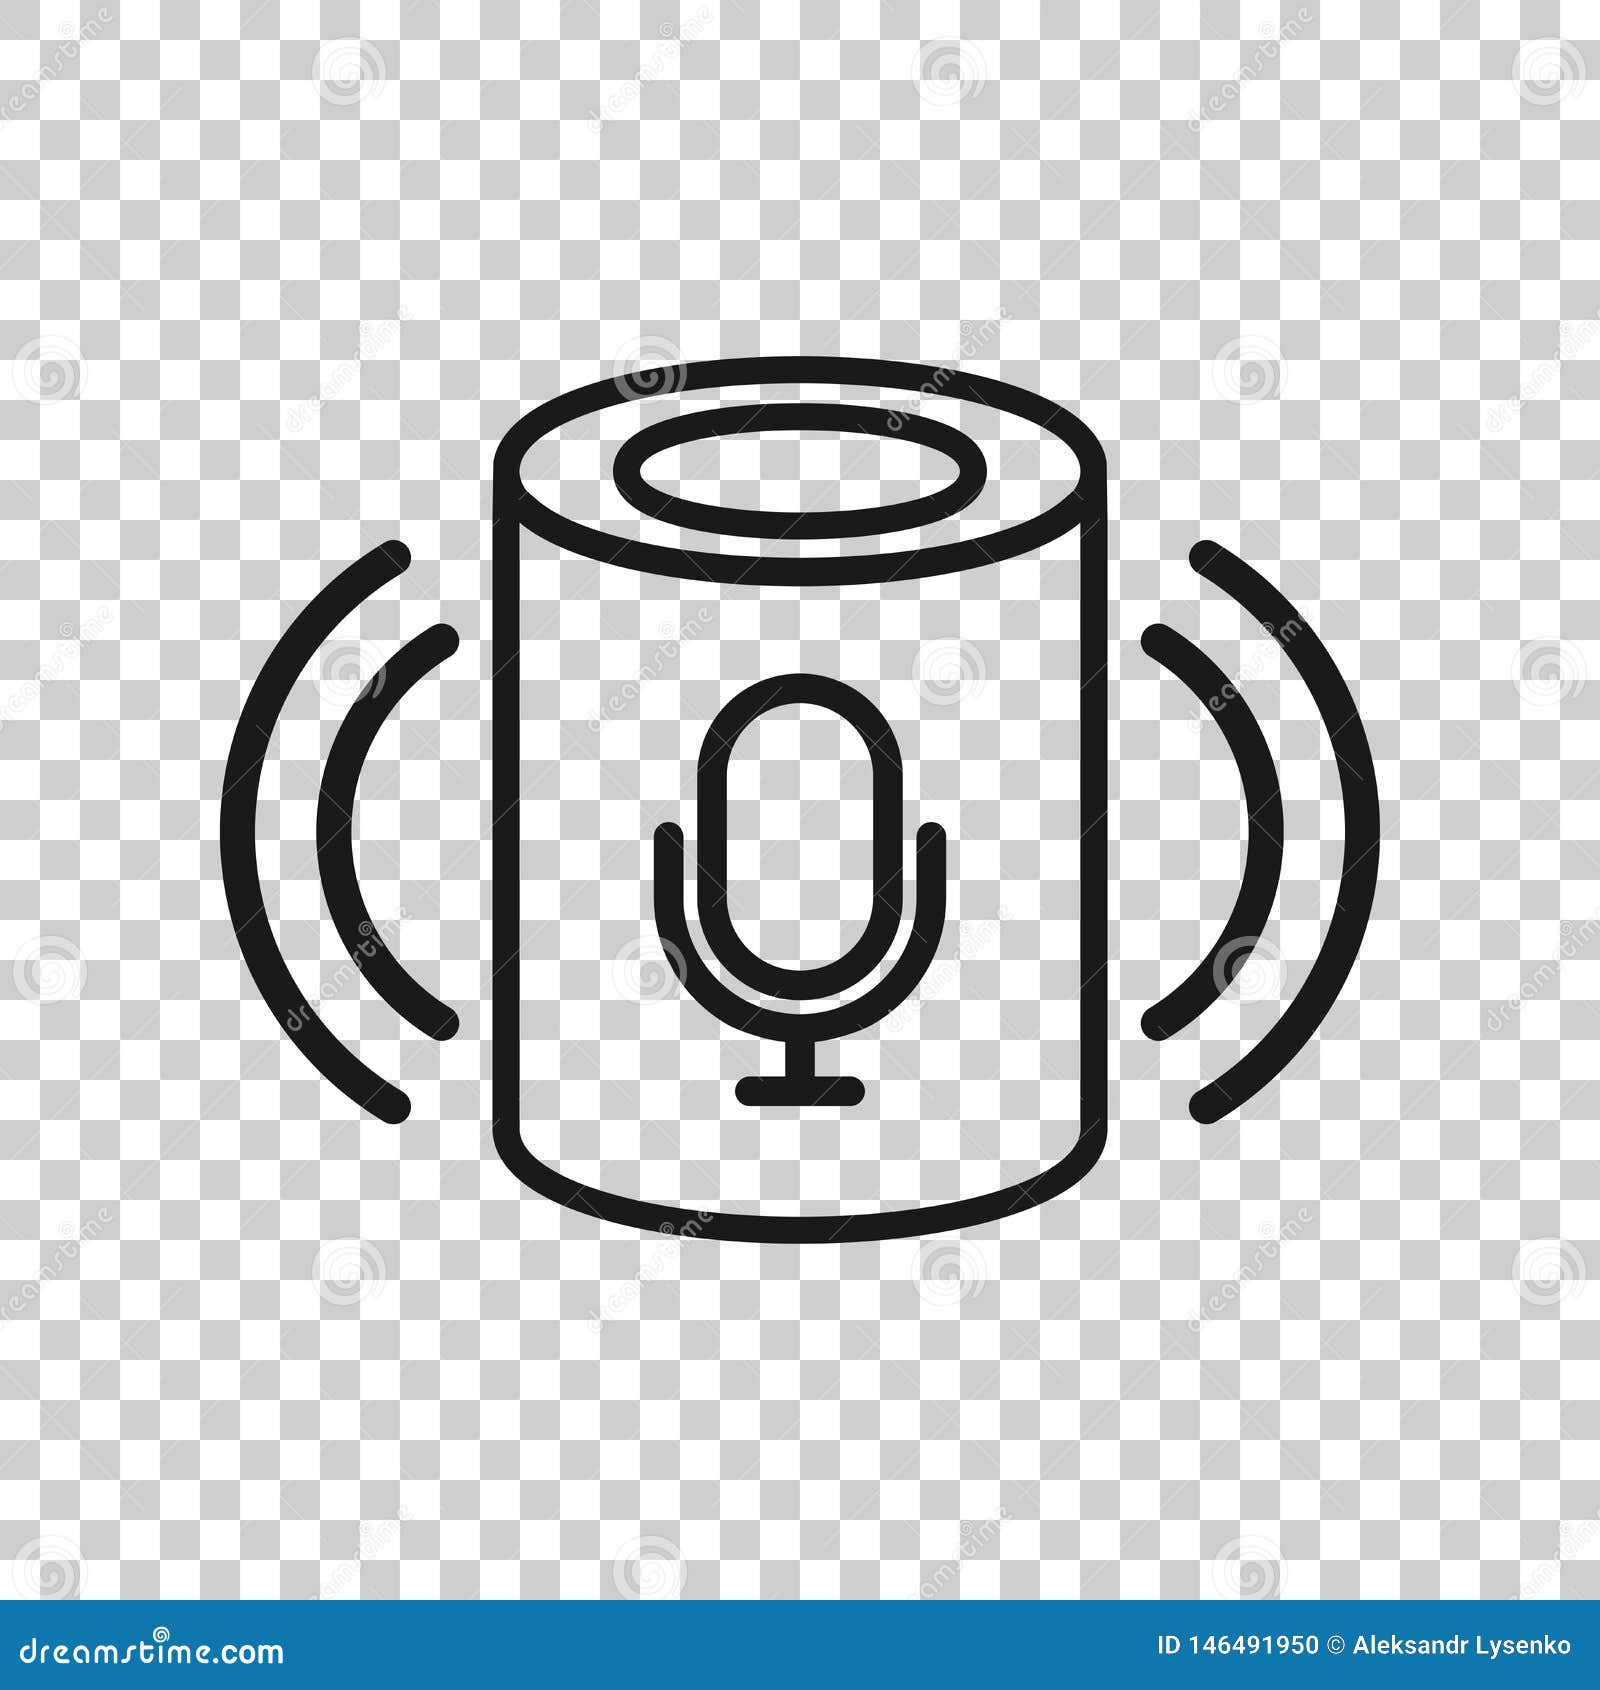 Download Voice Assistant Icon In Transparent Style. Smart Home ...